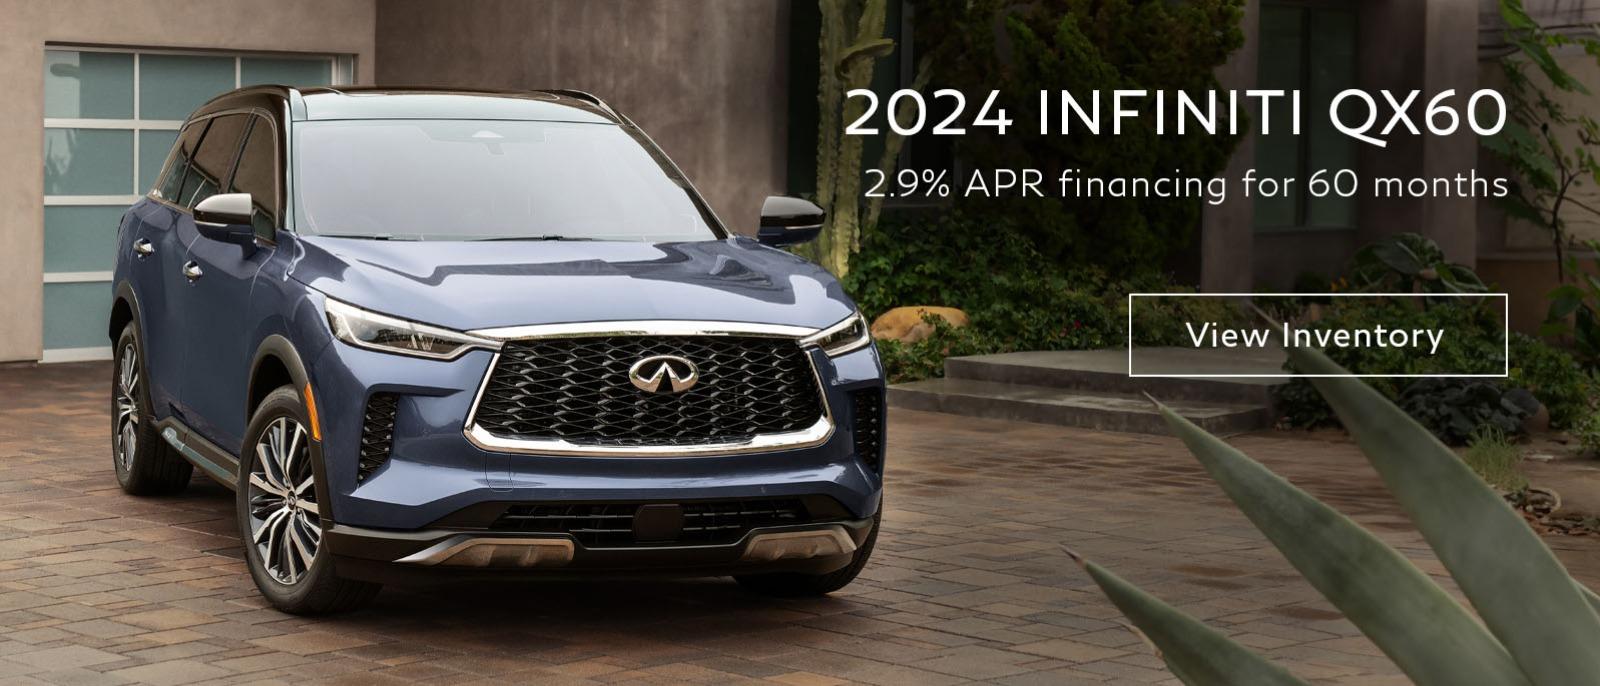 2.9% APR for 60 months on 2024 QX60